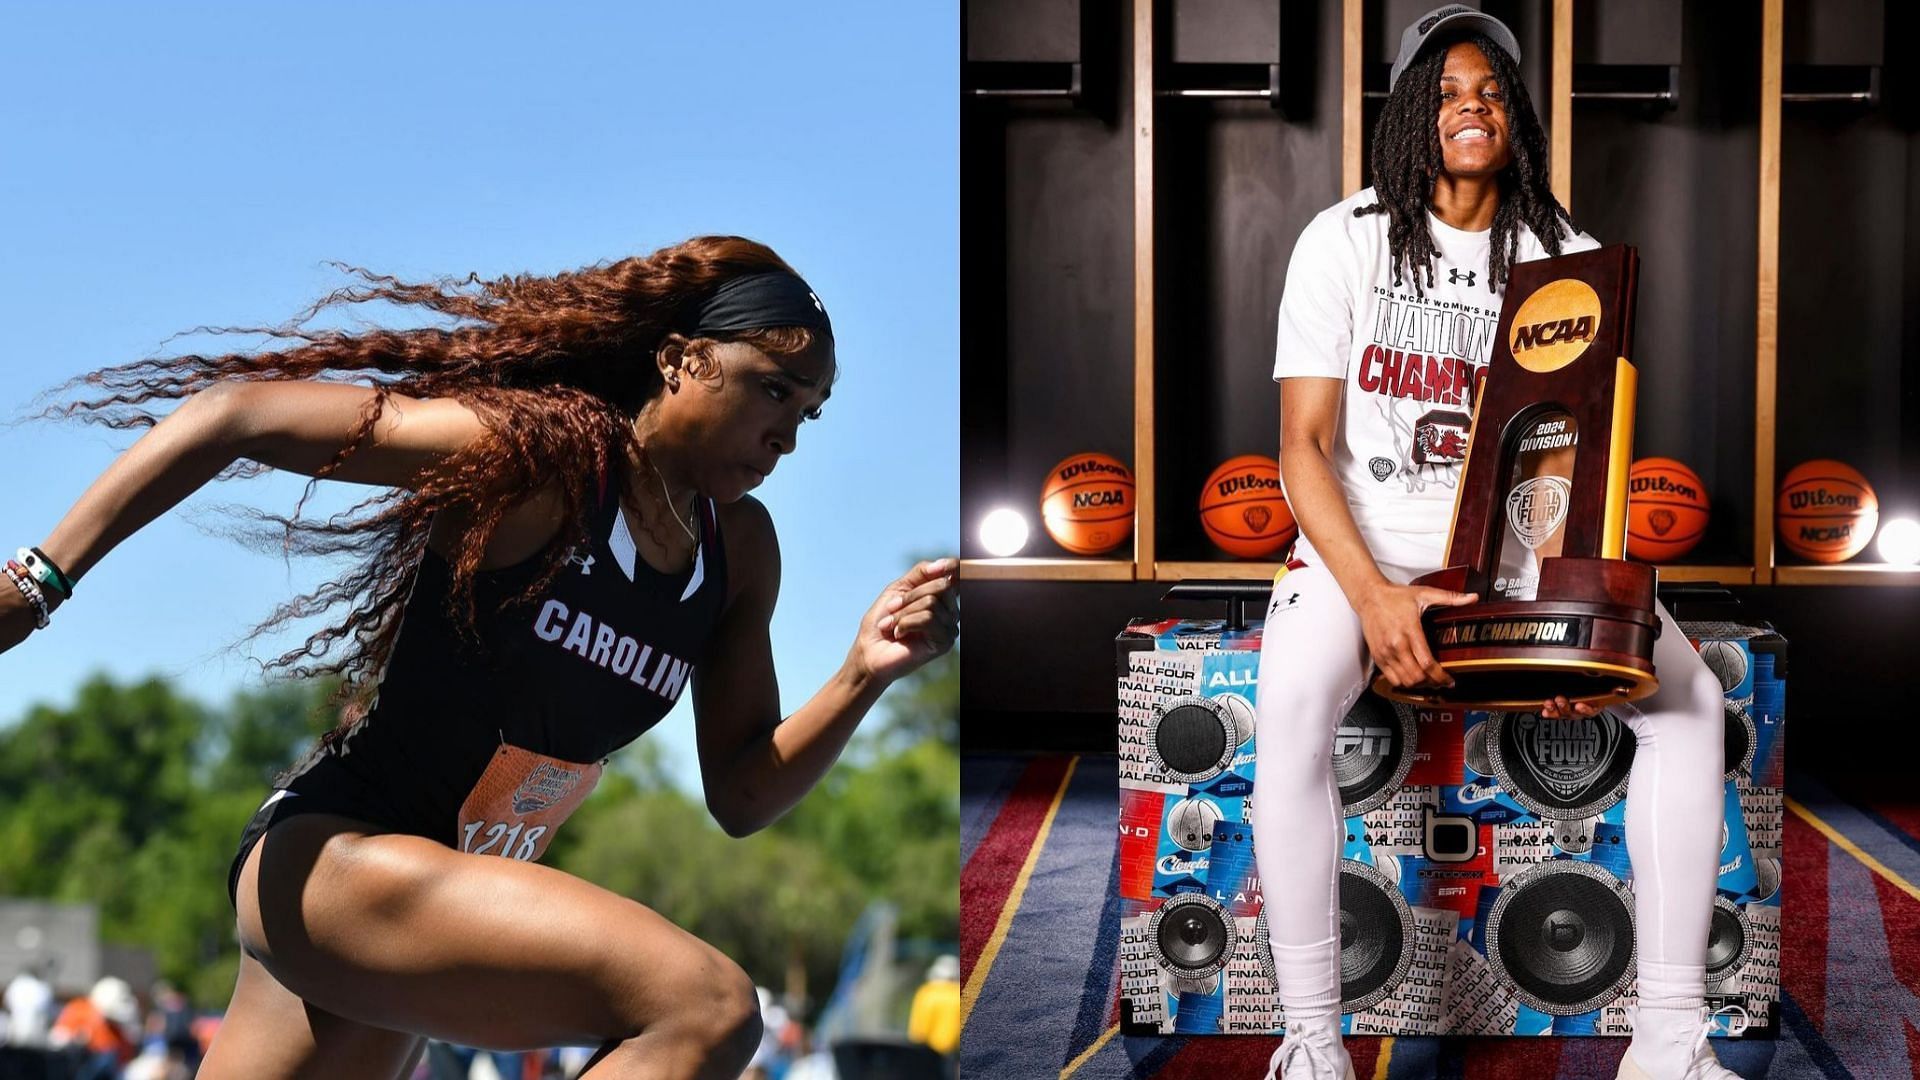 South Carolina stars Jameesia Ford and MiLaysia Fulwiley